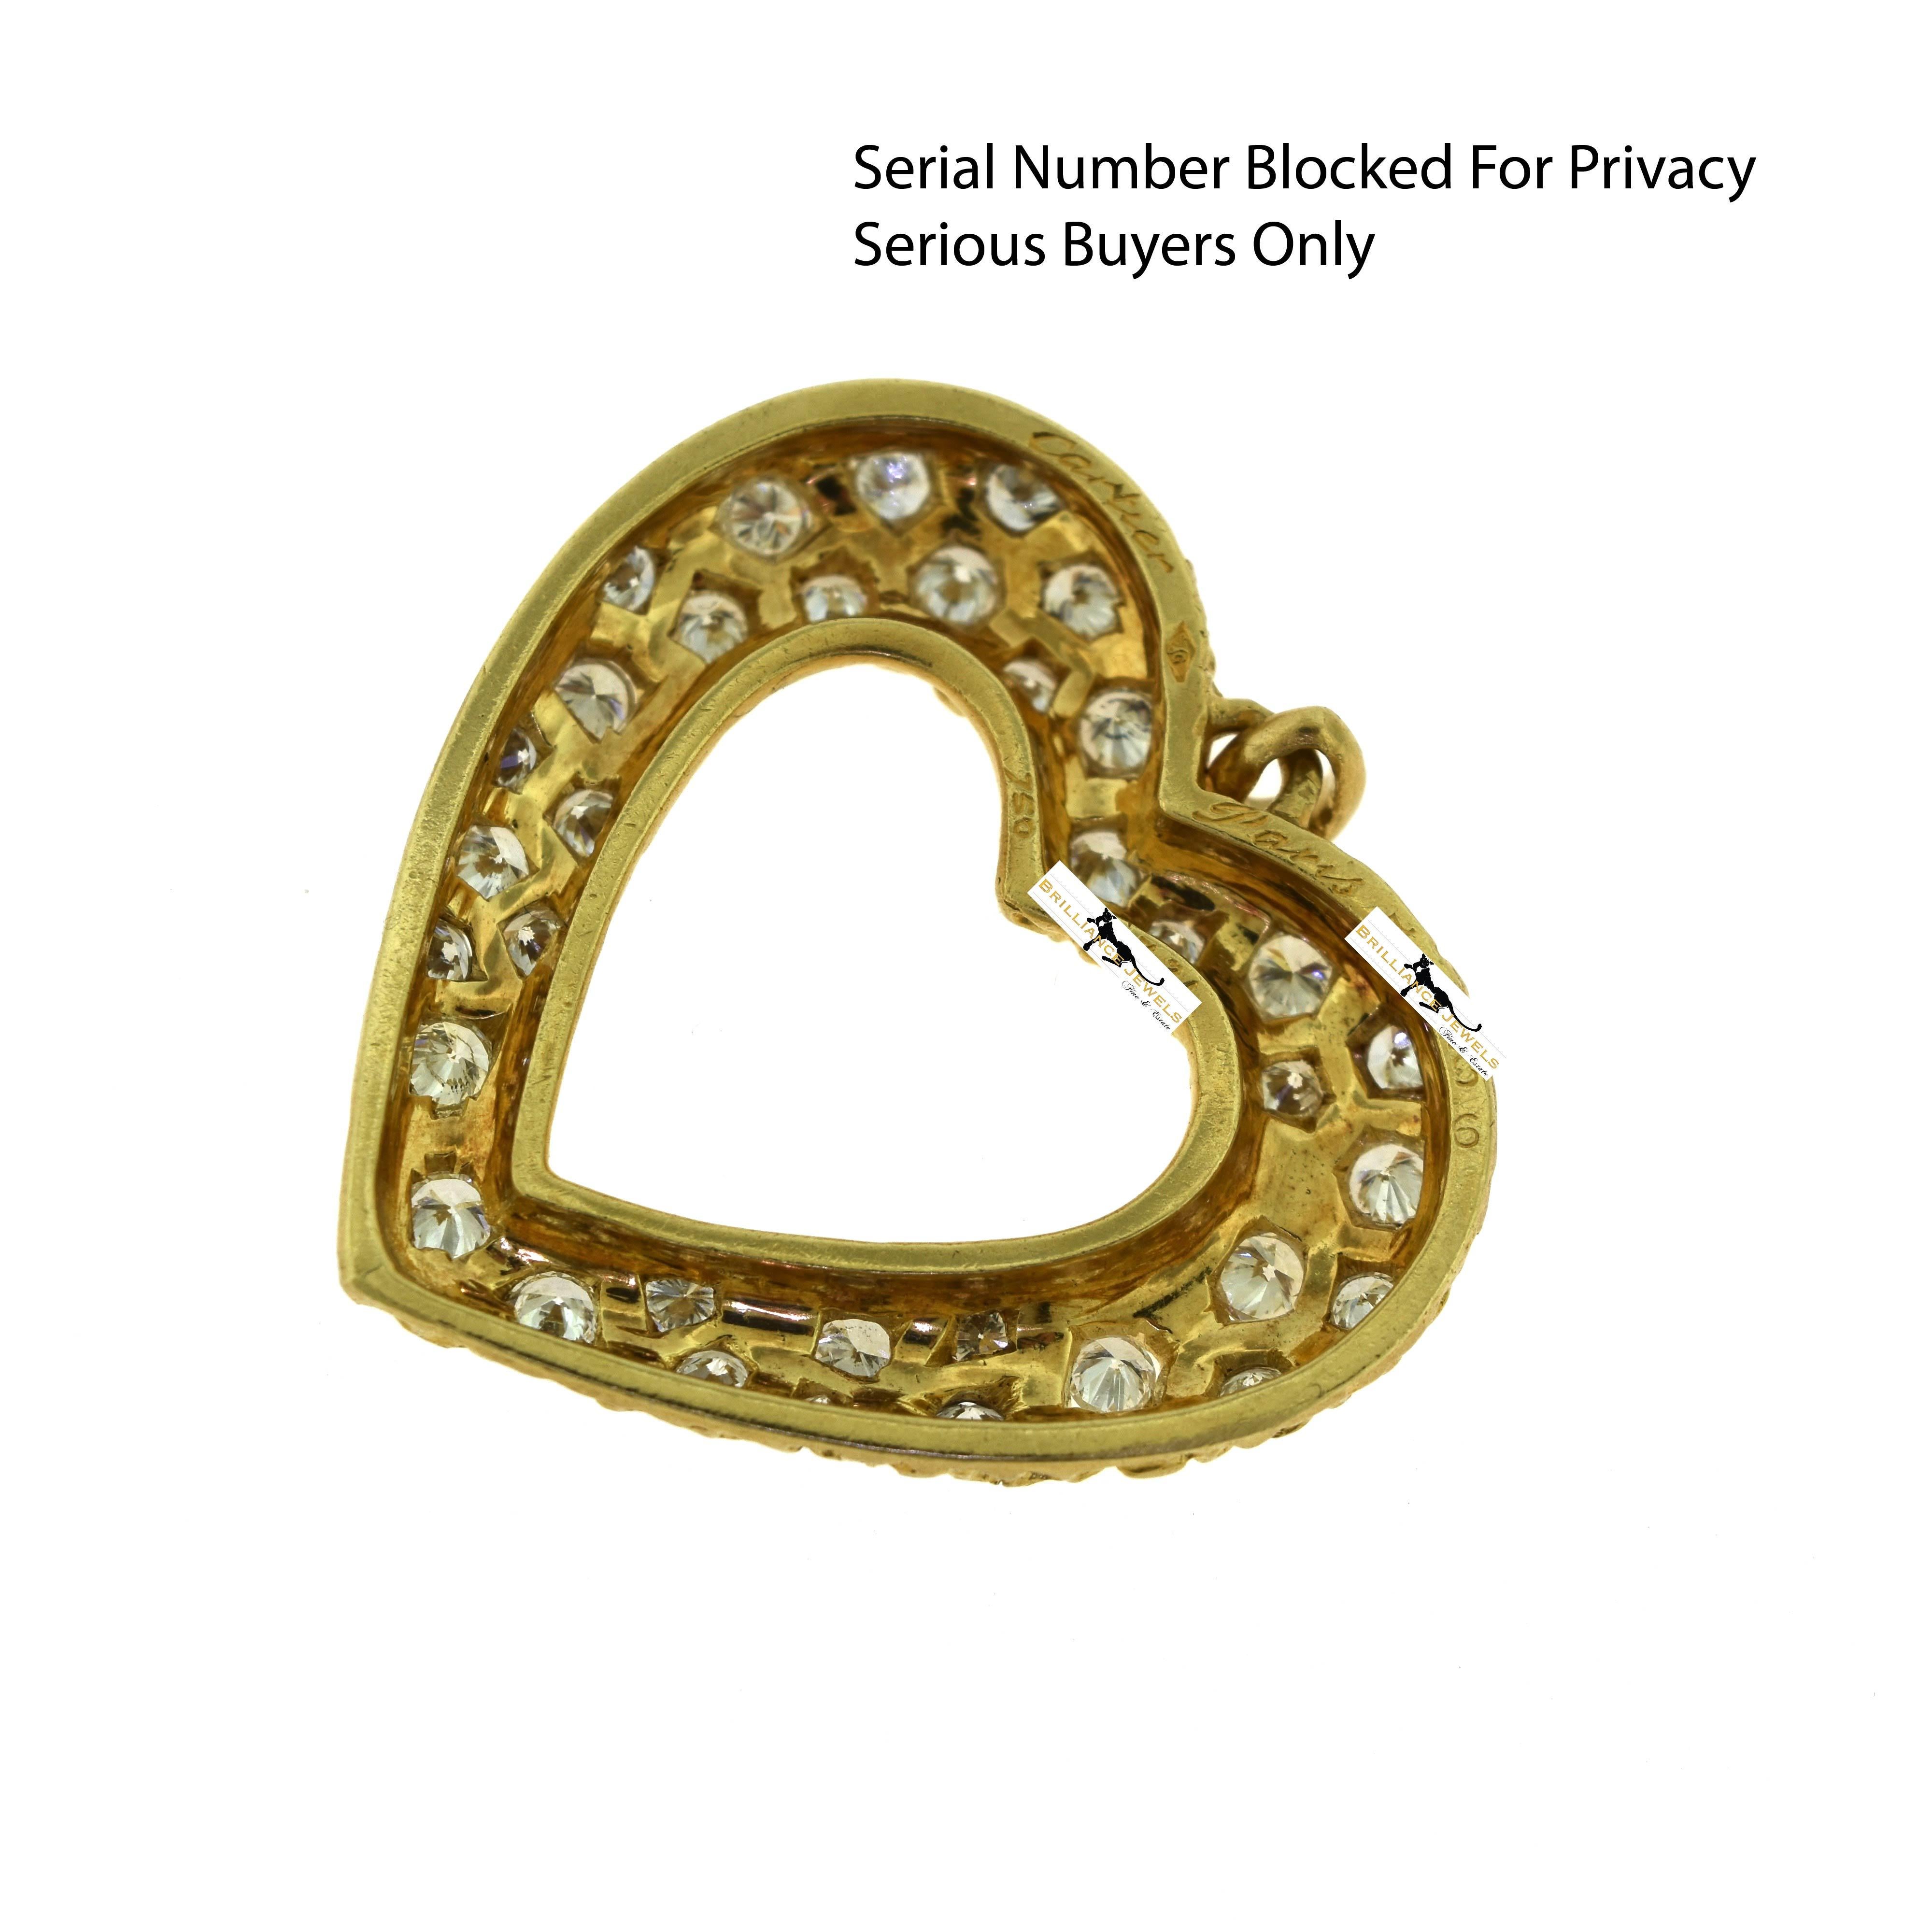 Brilliant Cut Vintage French Cartier Diamond Heart Pendant Necklace in 18k Yellow Gold